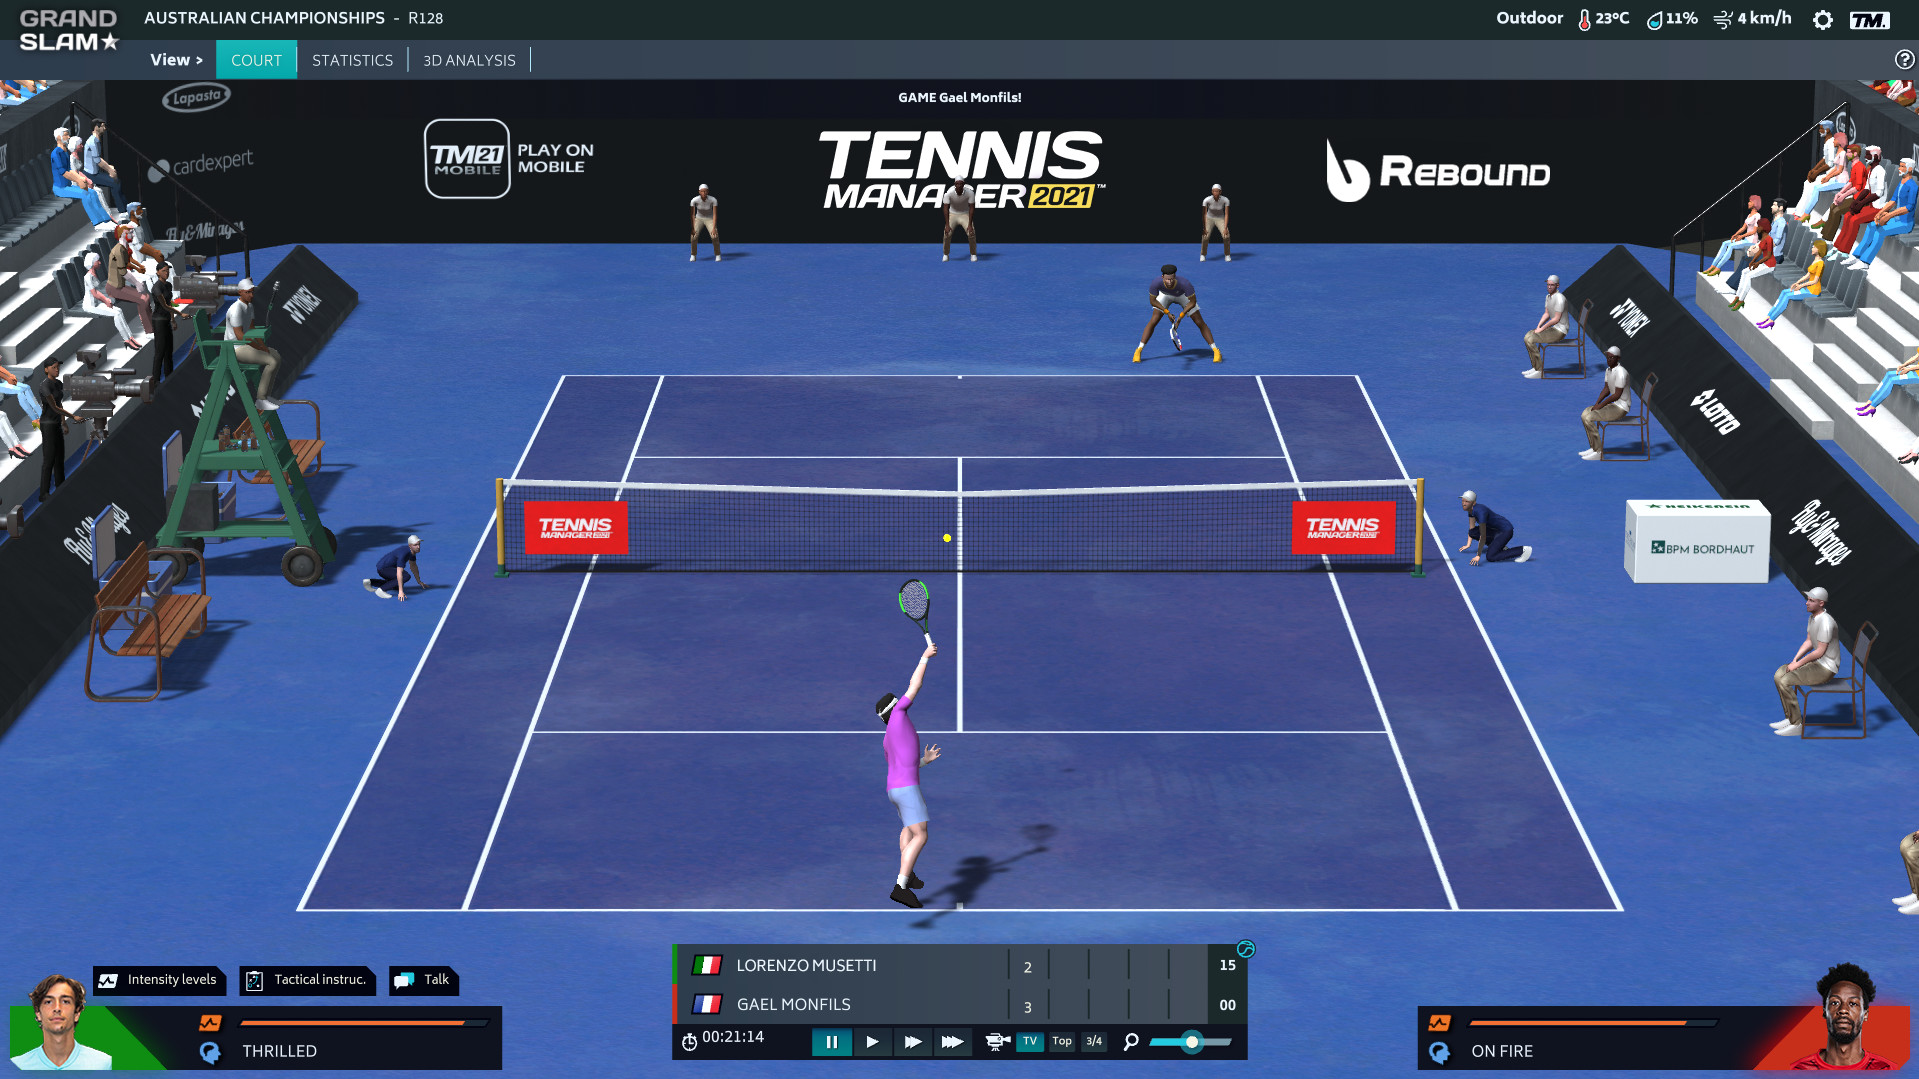 Tennis Manager 2021 on Steam